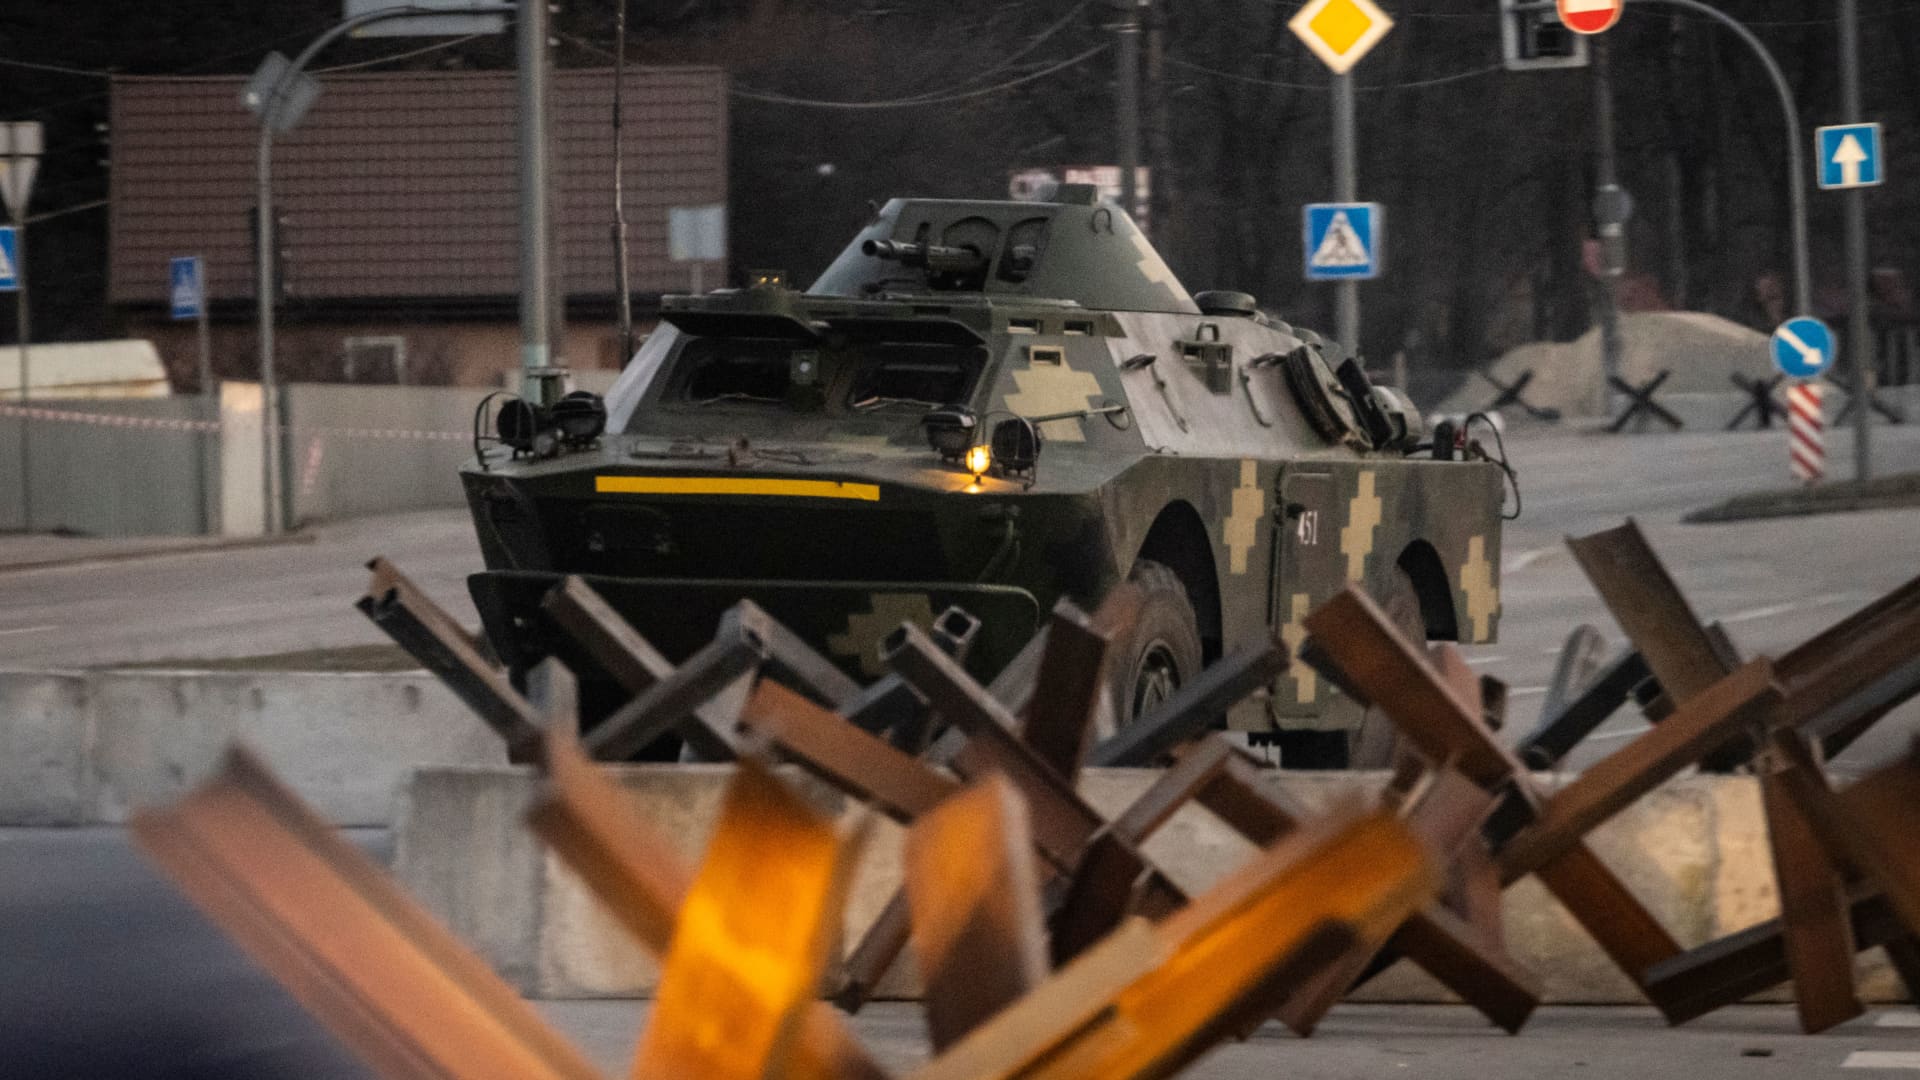 A Ukranian armoured vehicle drives along a road in the Ukranian capital Kyiv on March 19, 2022.